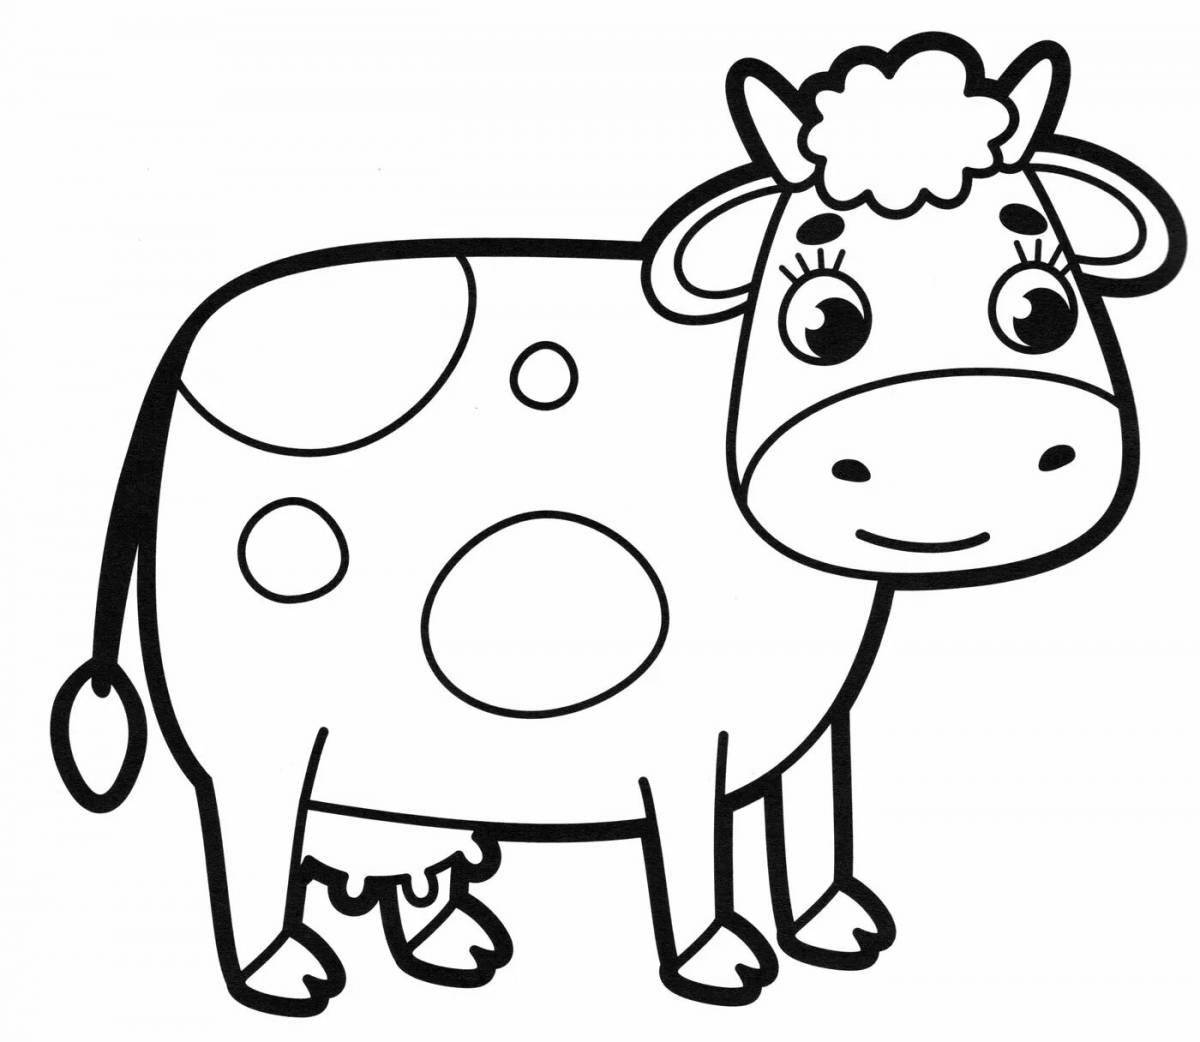 Great cow coloring book for 3-4 year olds